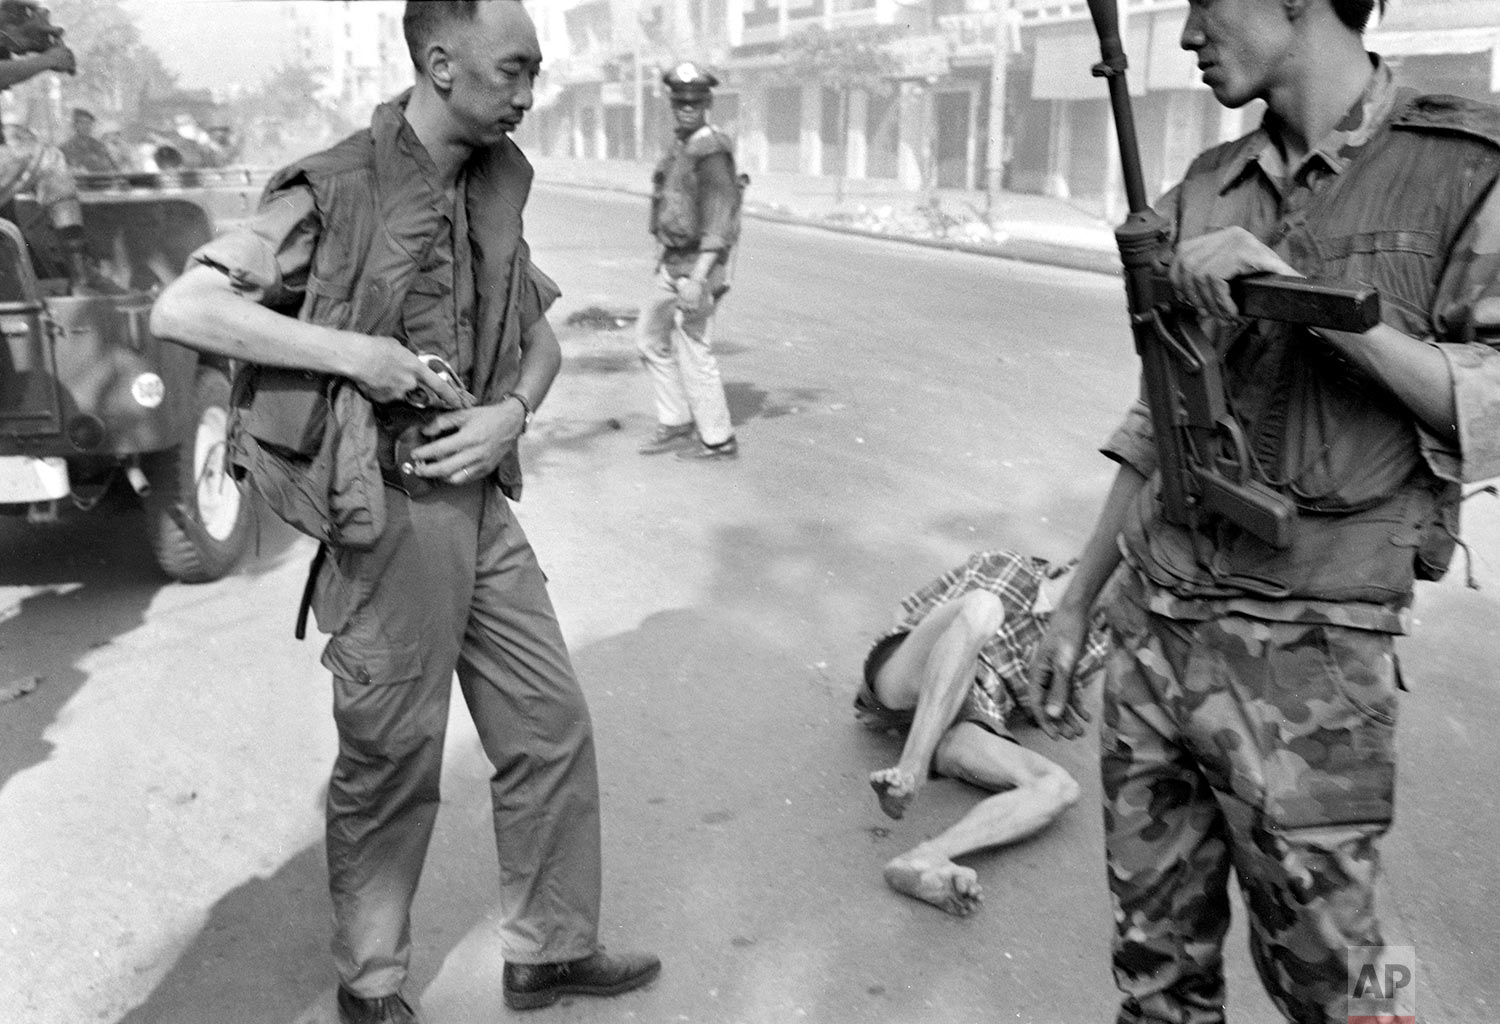  ** EDS NOTE: GRAPHIC CONTENT ** South Vietnamese Gen. Nguyen Ngoc Loan, chief of the national police, holsters his gun after executing suspected Viet Cong officer Nguyen Van Lem (also known as Bay Lop) whose body lies on a Saigon street Feb. 1, 1968